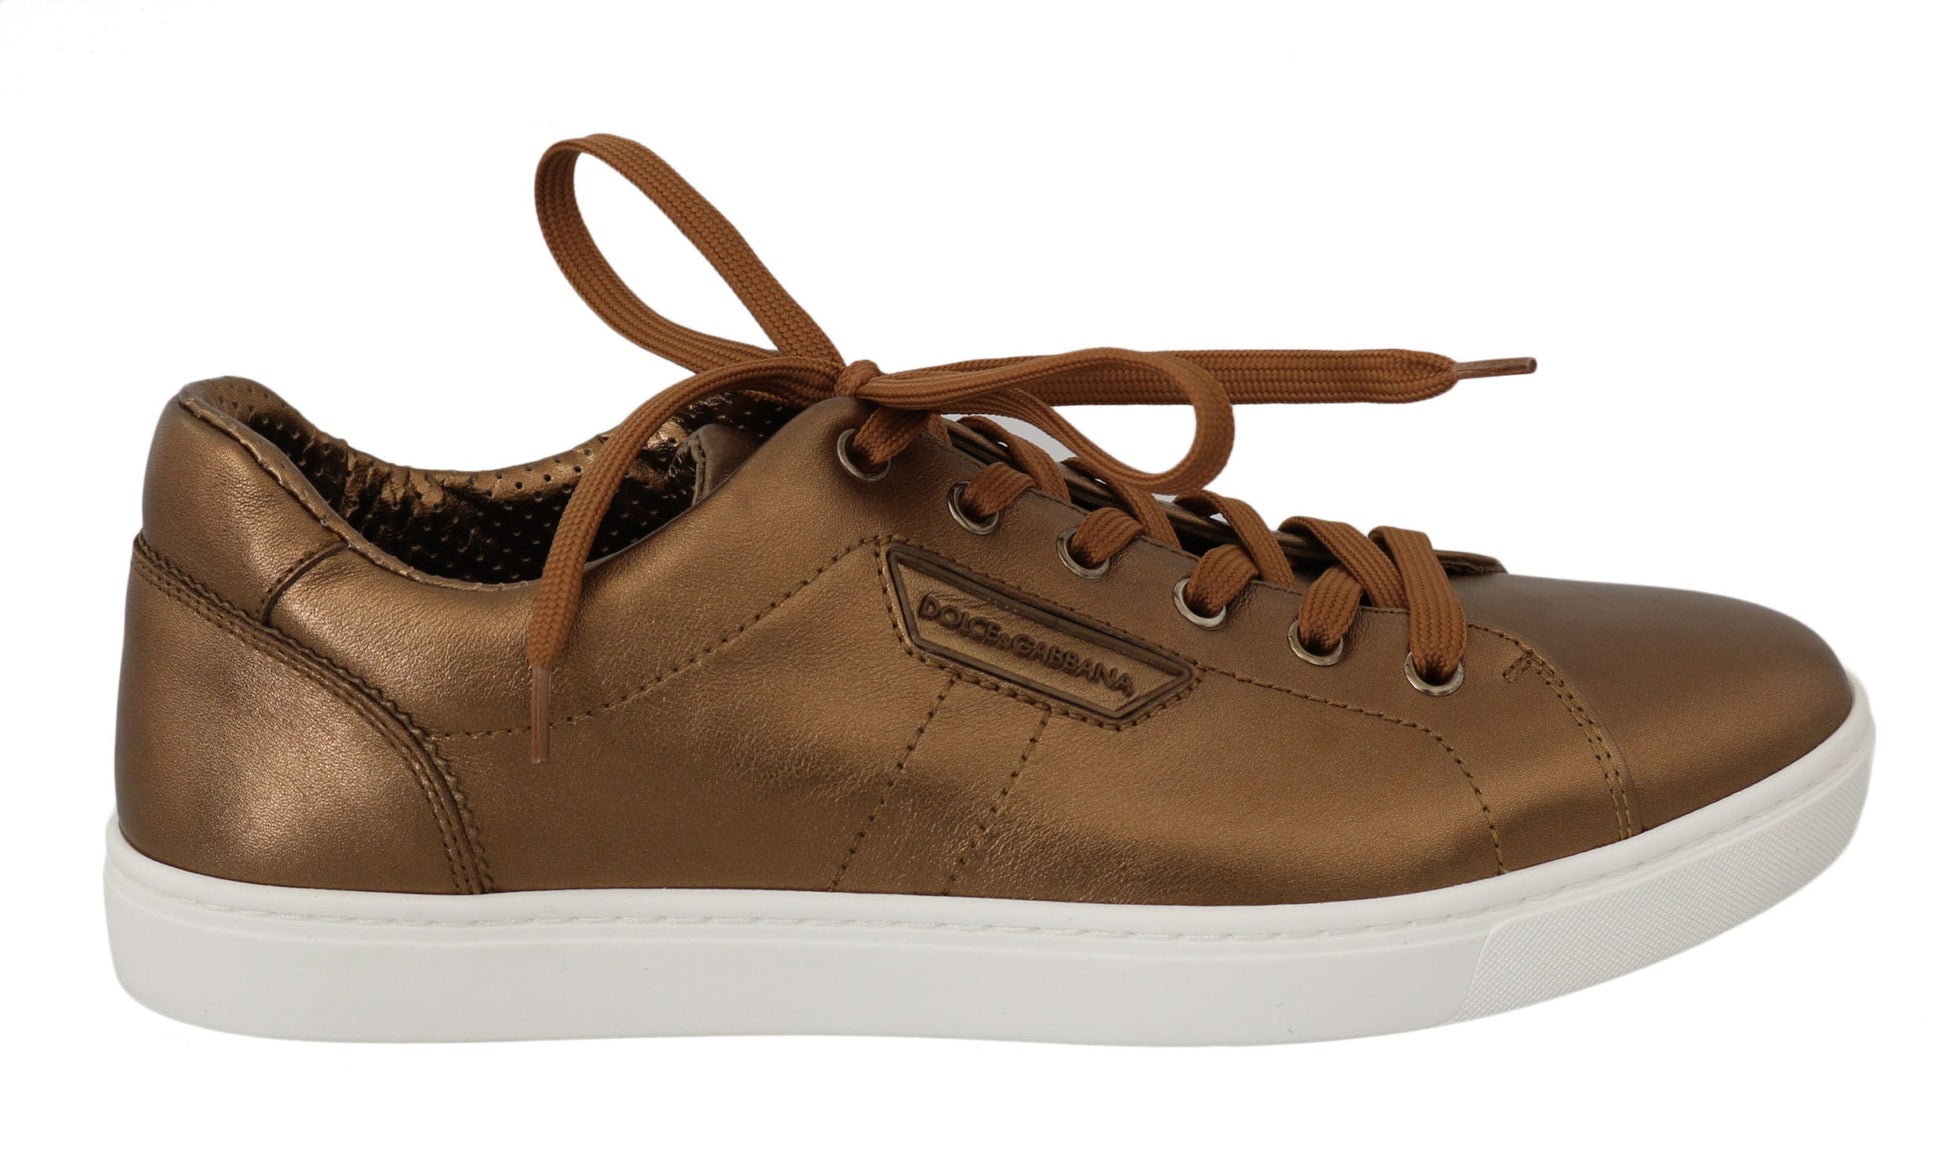 Dolce & Gabbana Gold Leather Mens Casual Sneakers | Fashionsarah.com